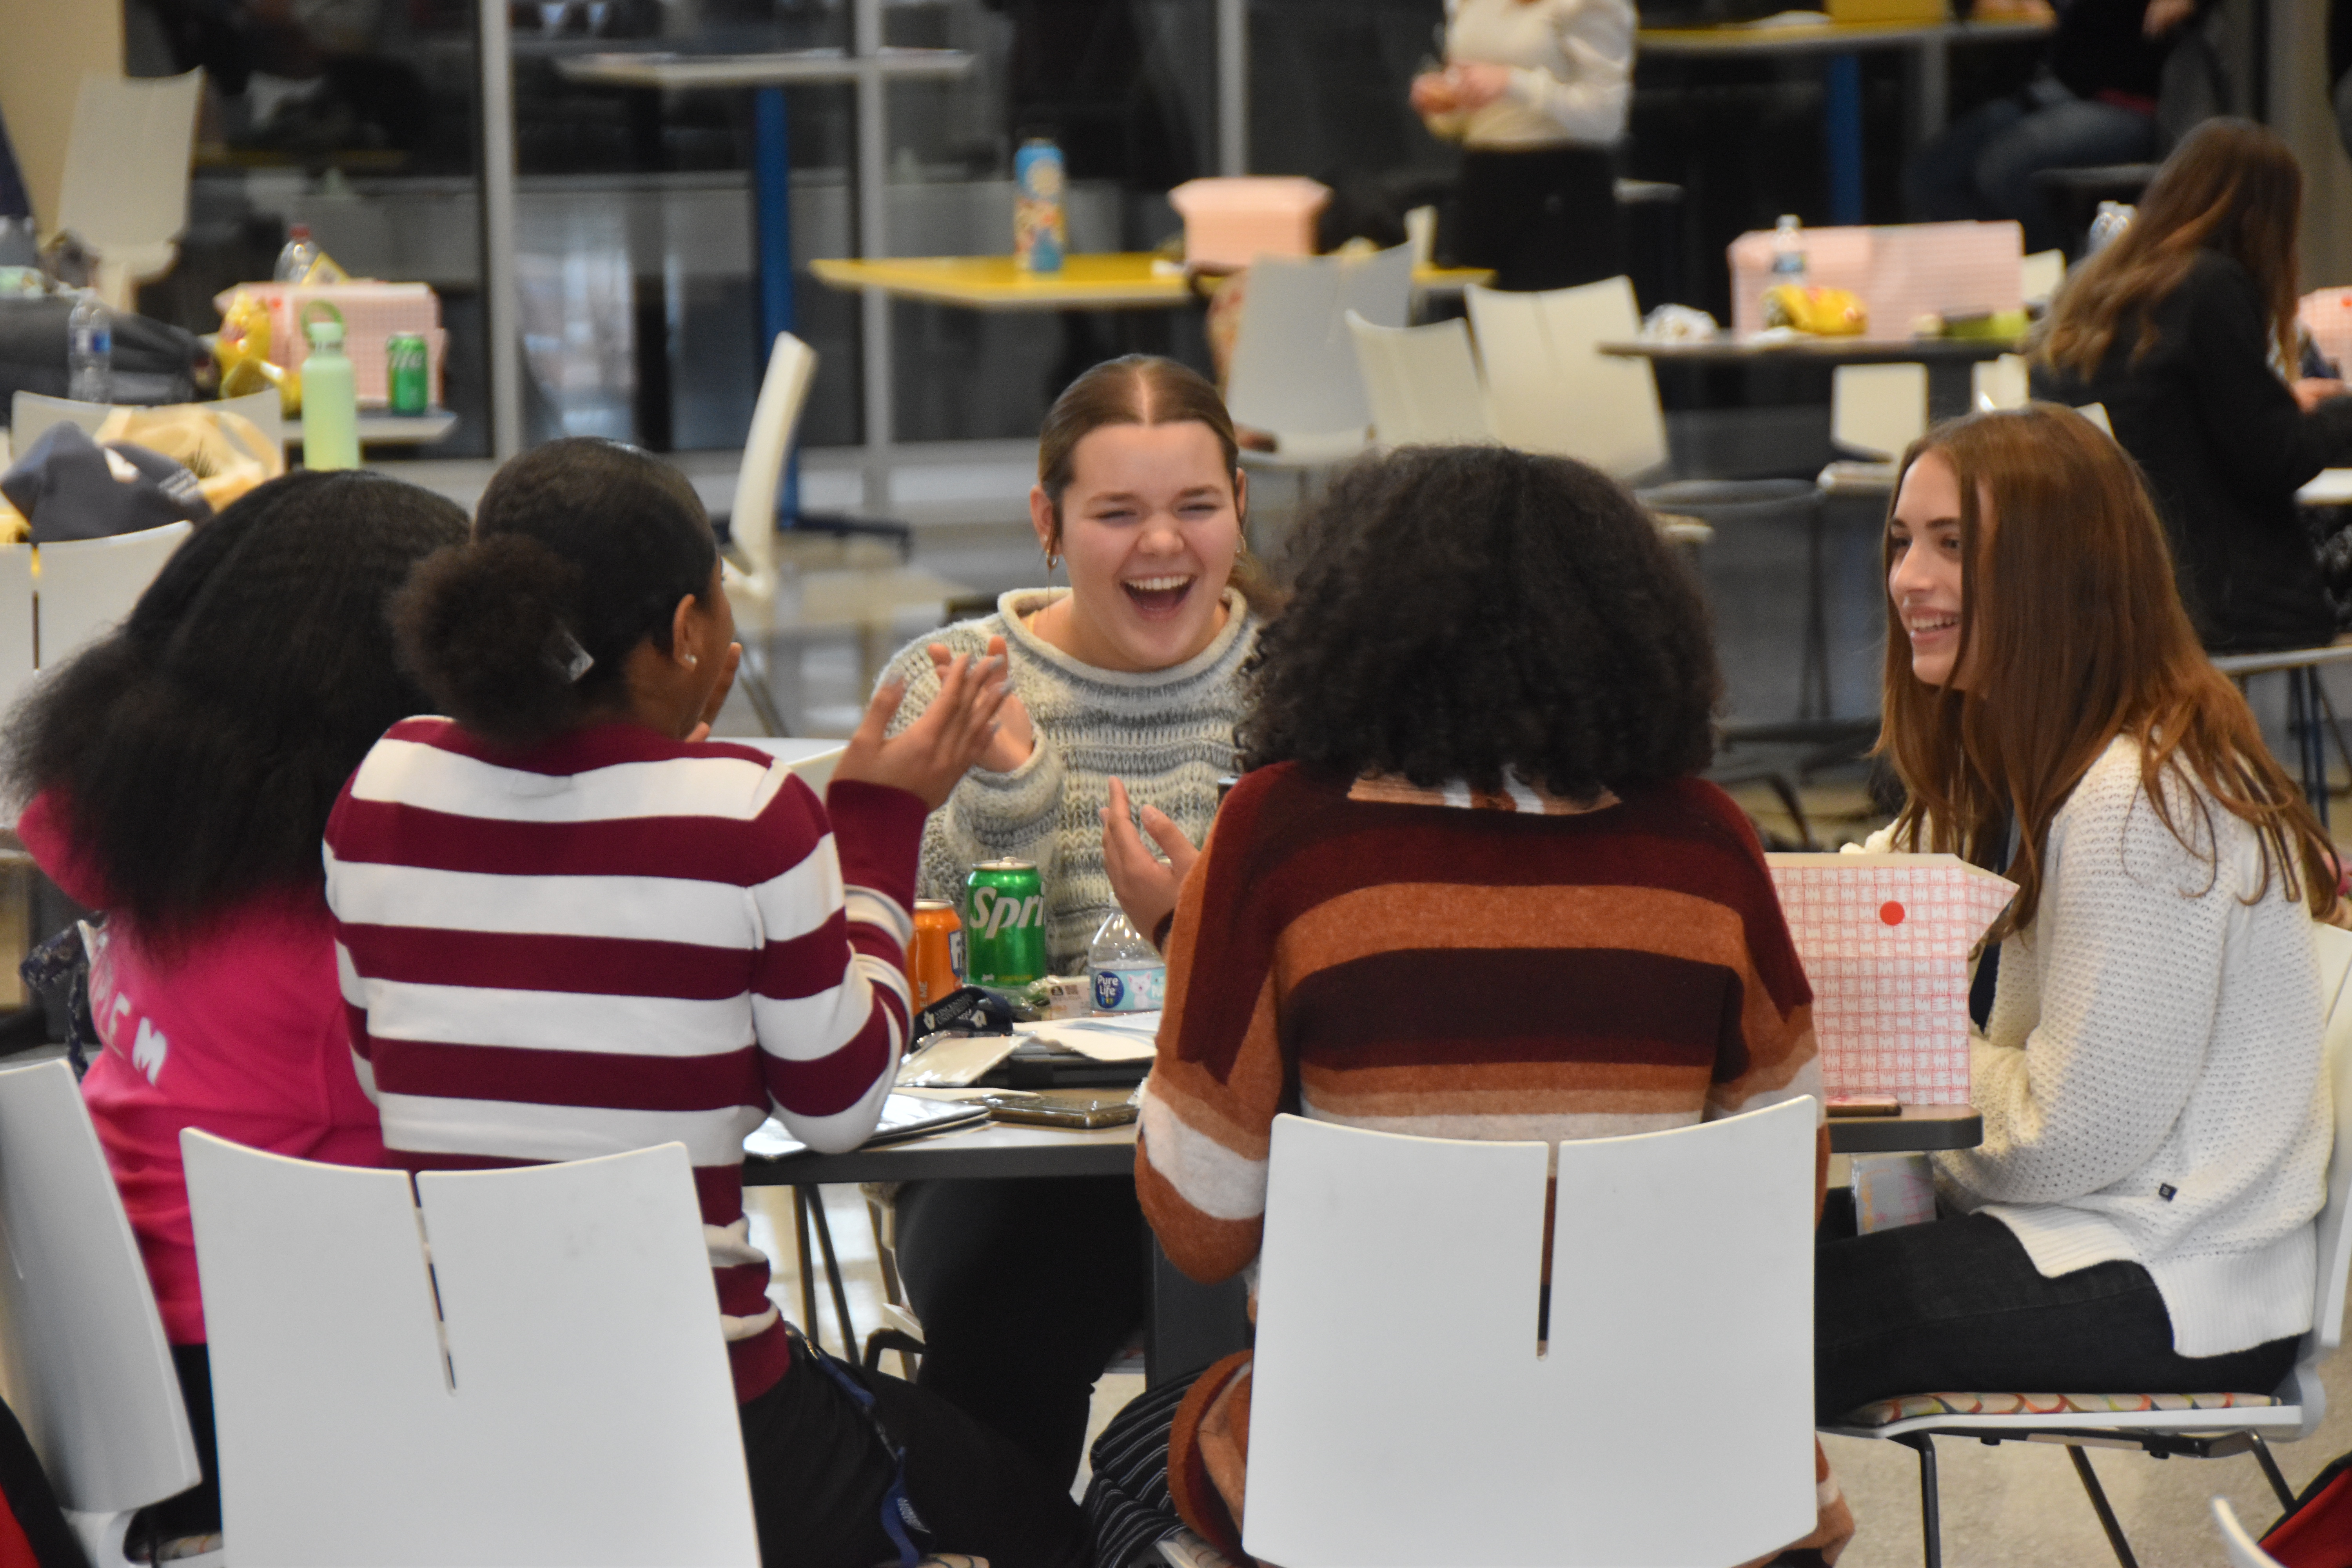 A group of smiling students hanging out while sitting at a table.